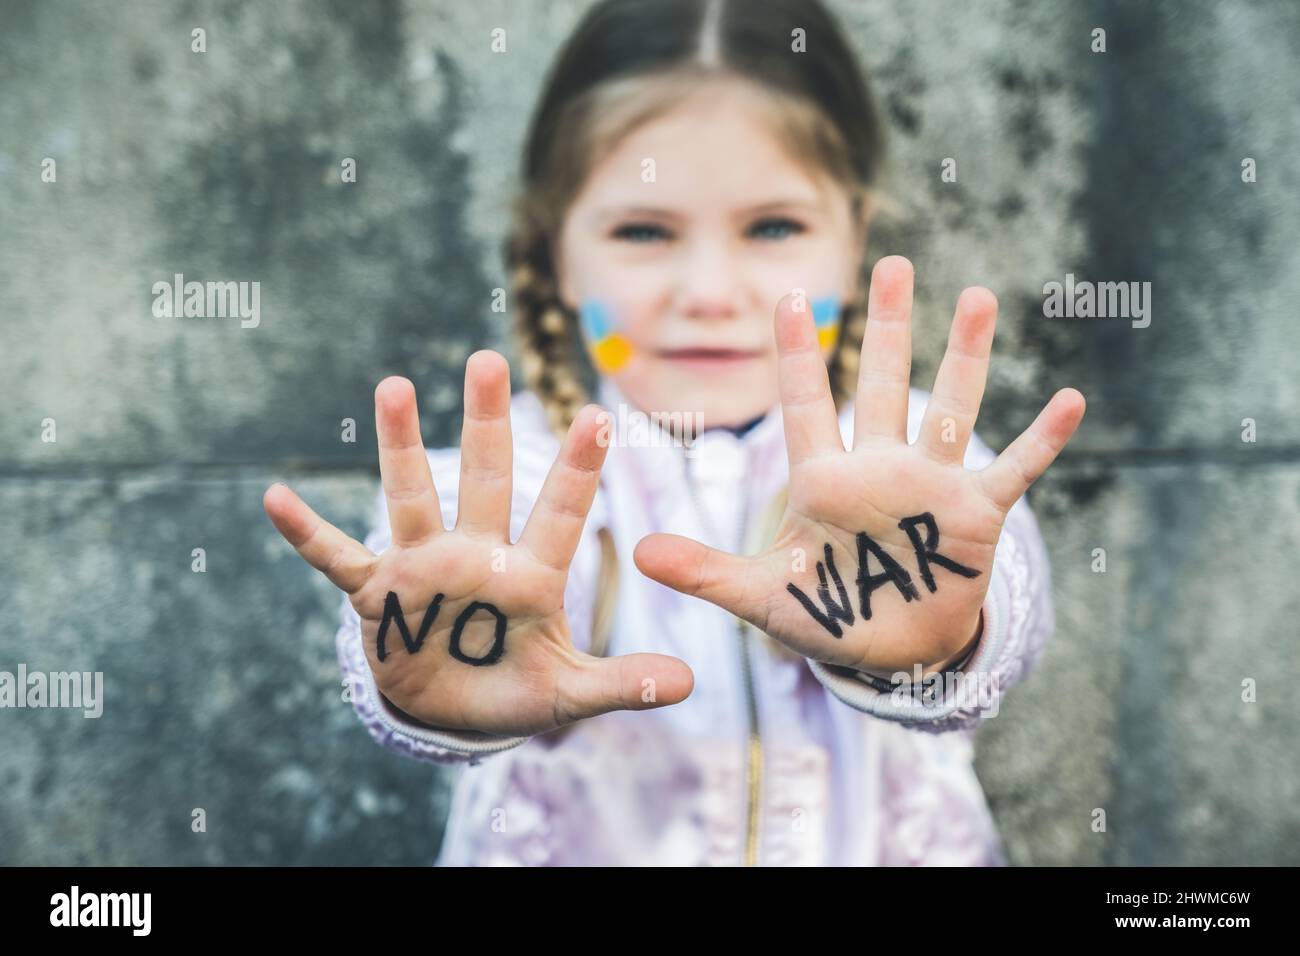 Beautiful and scared child inscription NO WAR on his hands. Russia's invasion of Ukraine, kids against the war Stock Photo